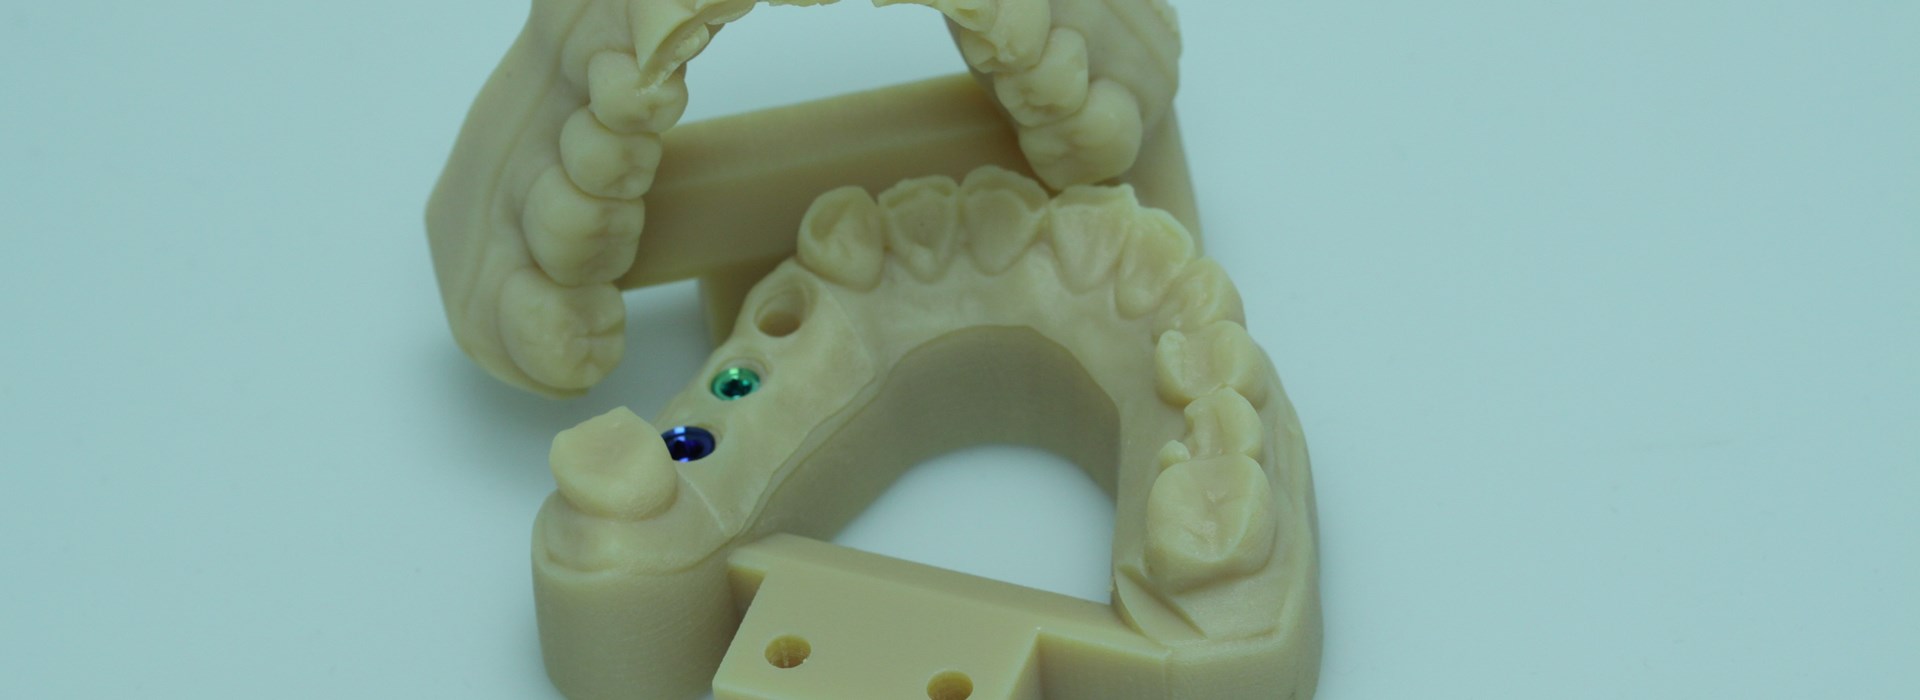 3d printed dental model with prosthetic guides